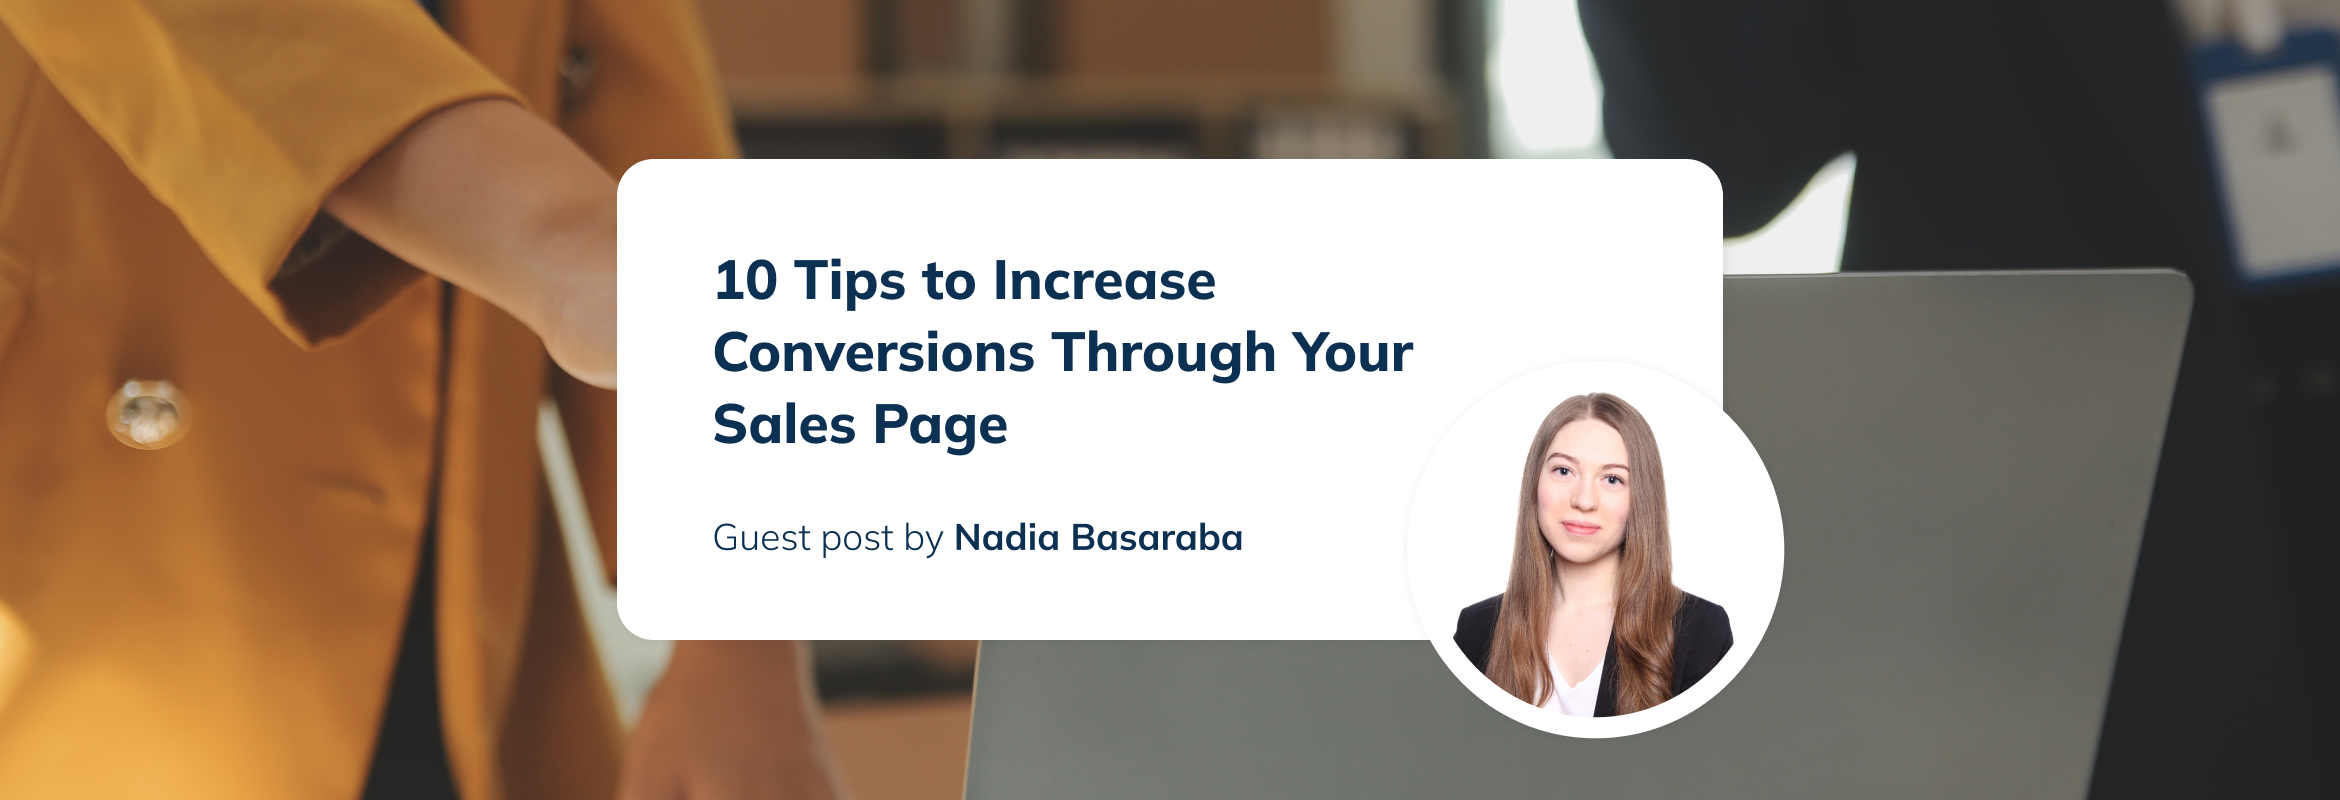 10 Tips to Increase Conversions Through Your Sales Page